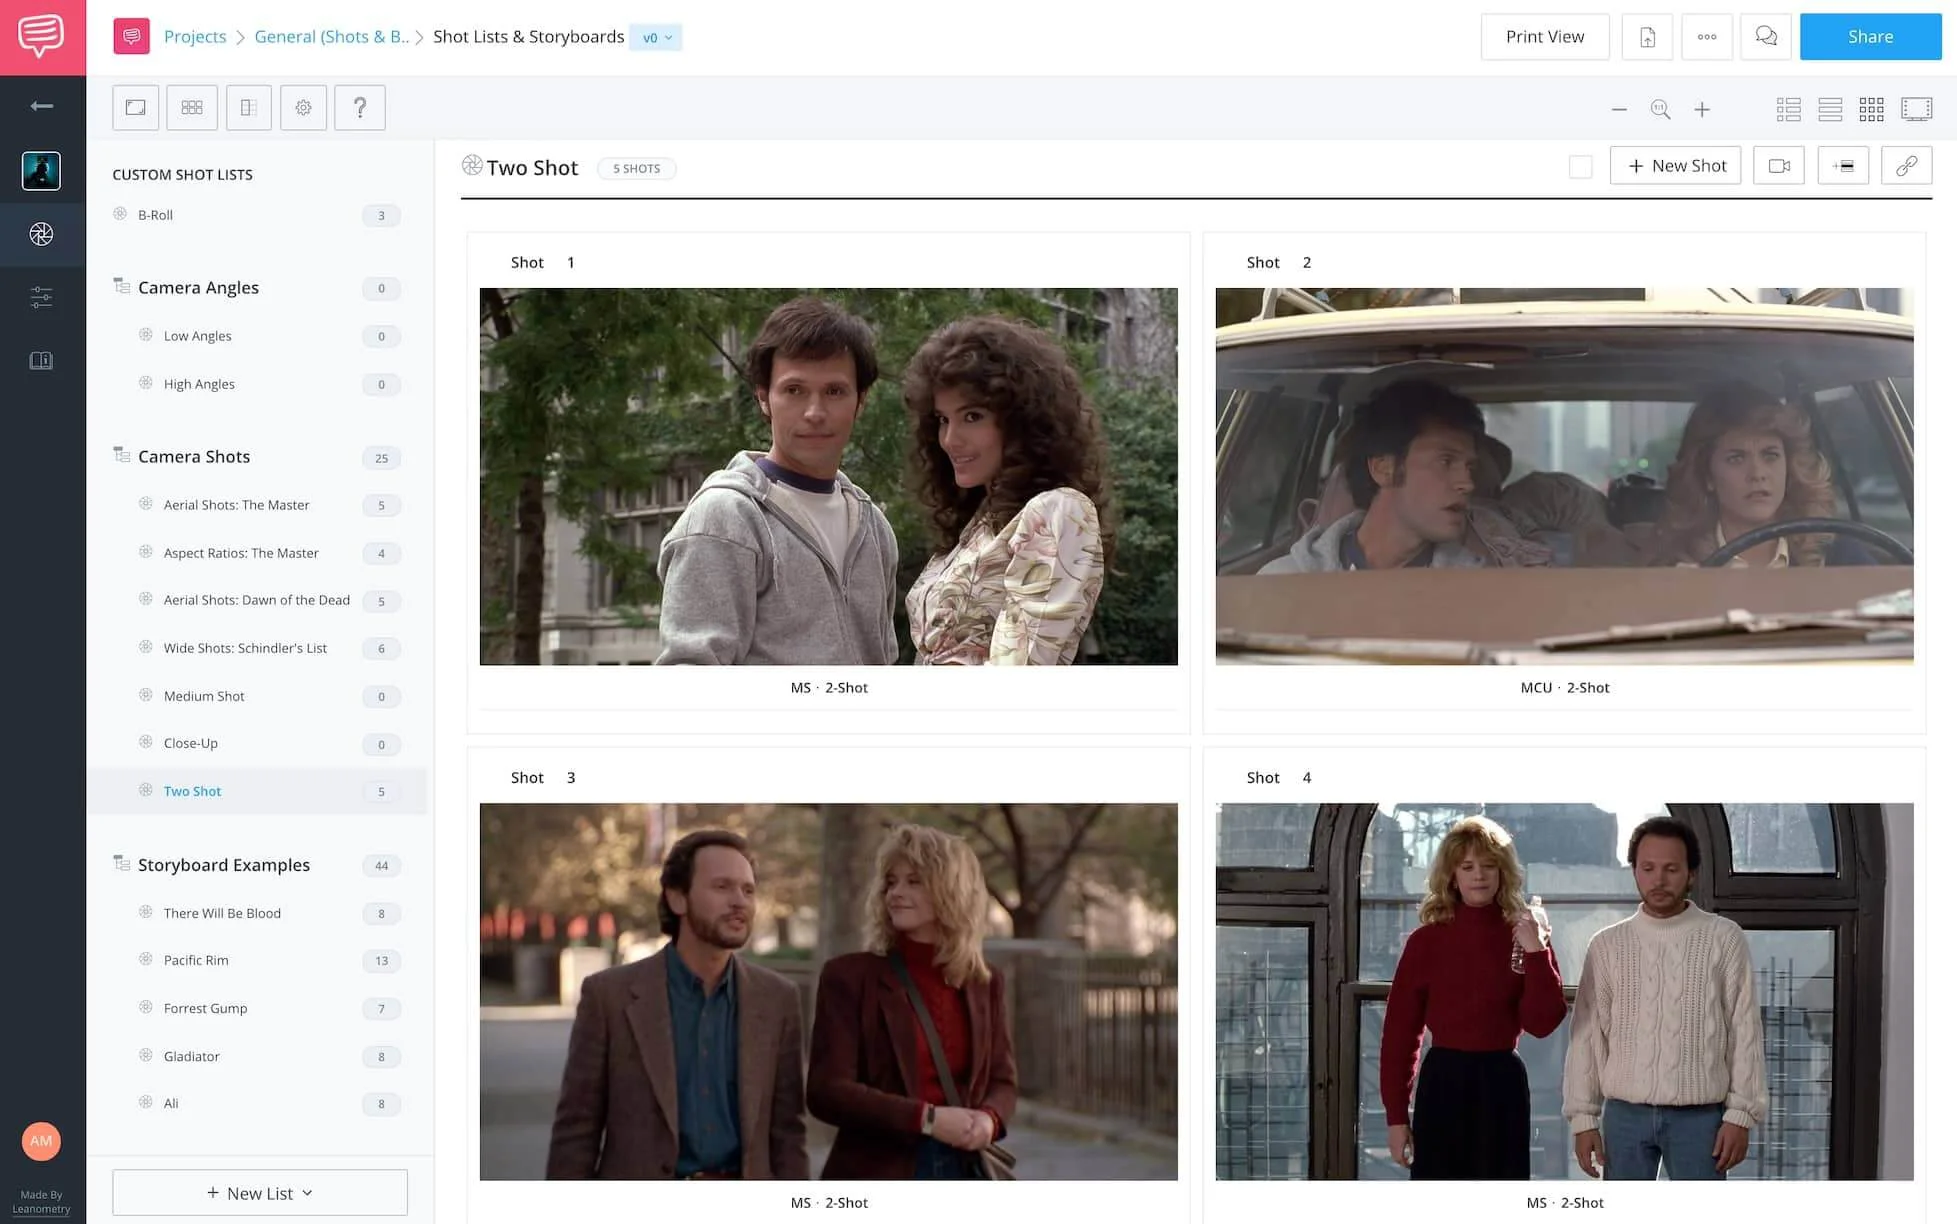 The Two Shot - When Harry Met Sally Two Shot Examples - StudioBinder Online Shot List Software